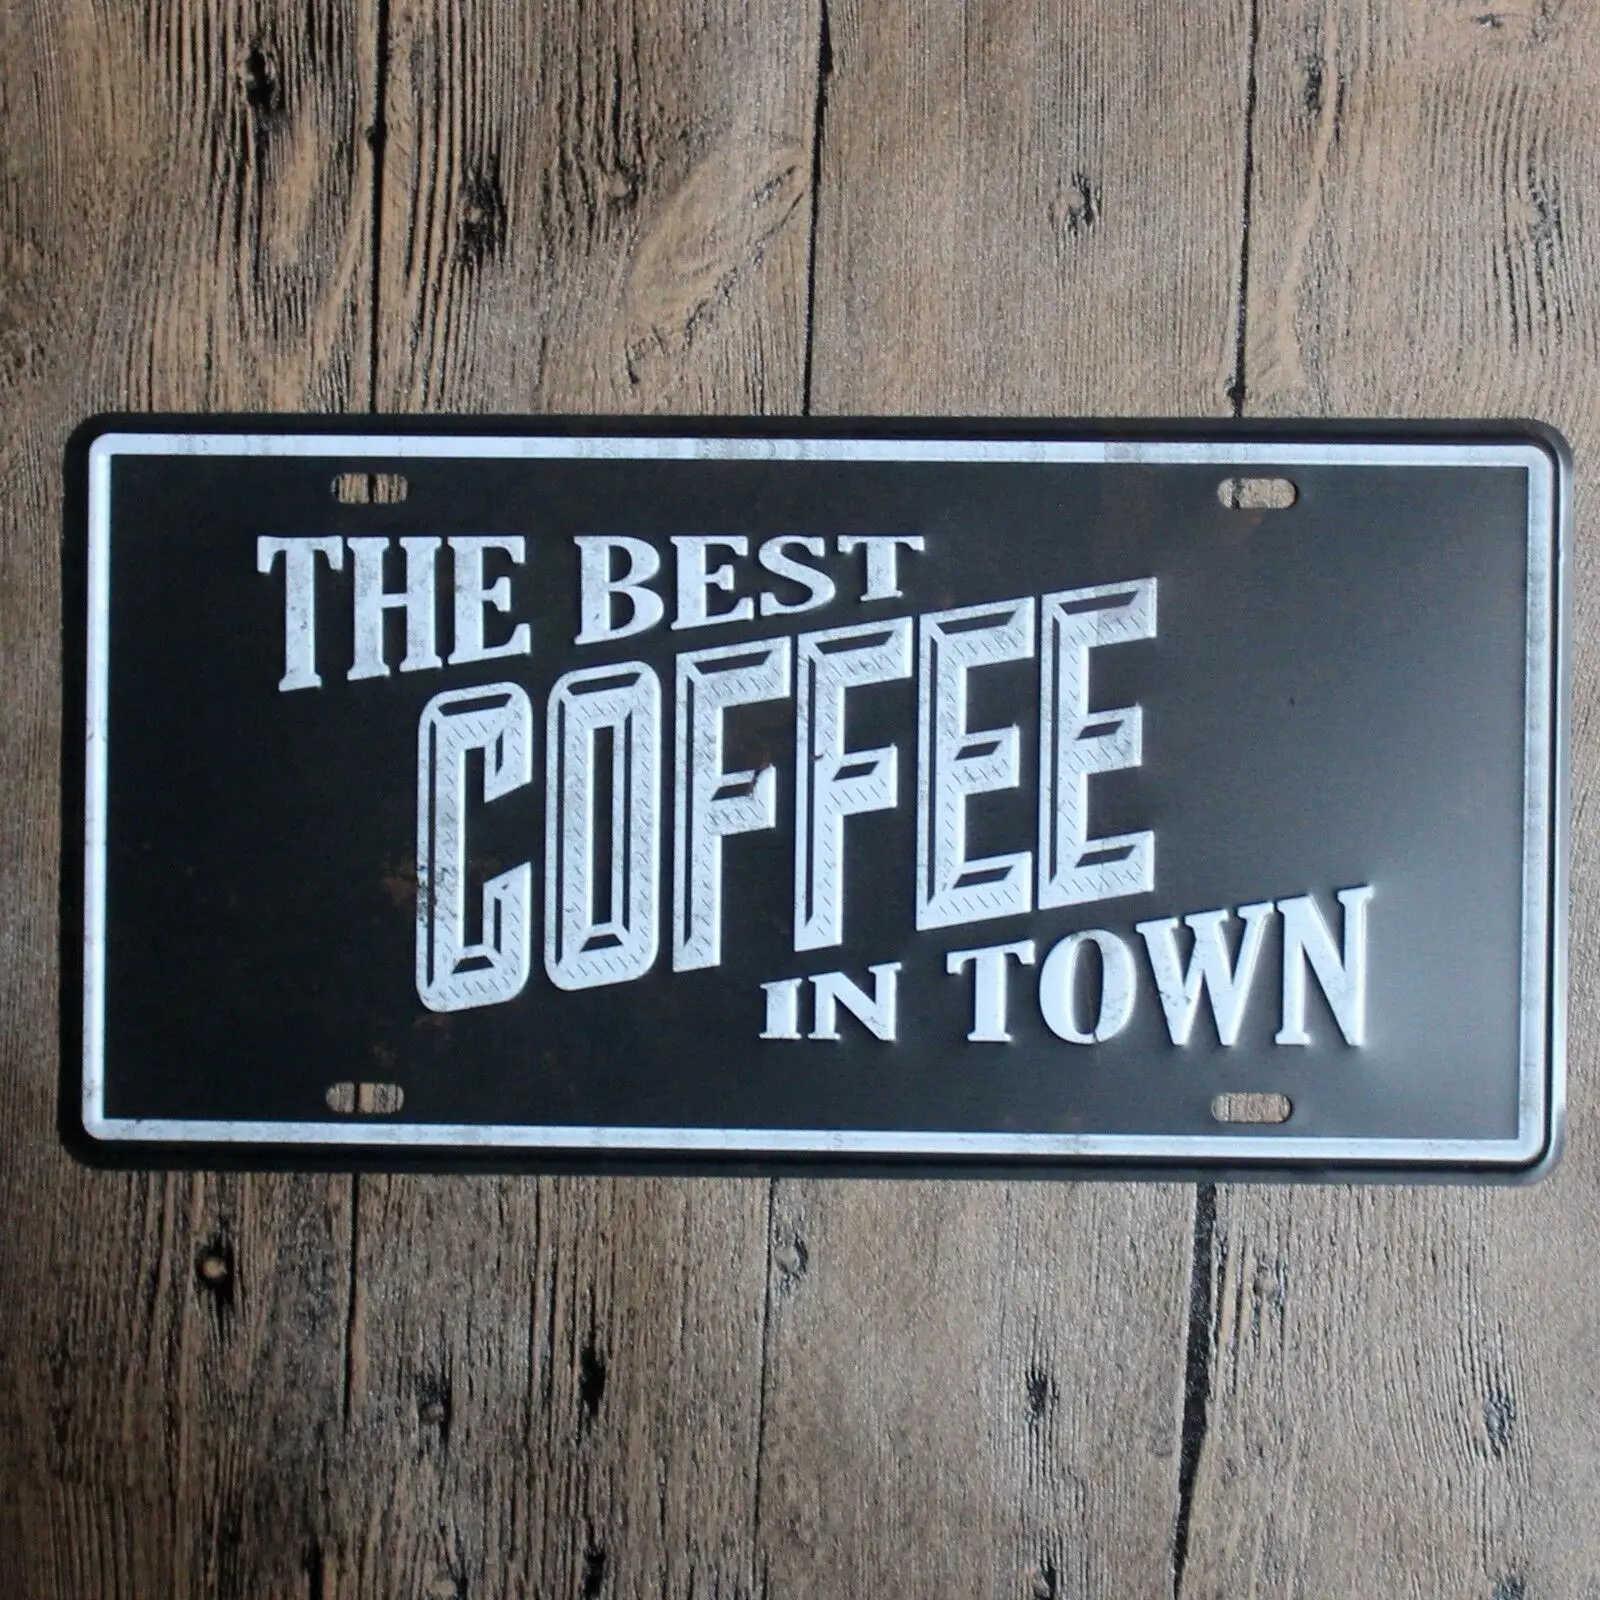 

The Best Coffee in Town License Plate for Garage Bar Pub Club Man Cave Shabby Chic Decor Plaque Wall Poster Vintage Decor Art